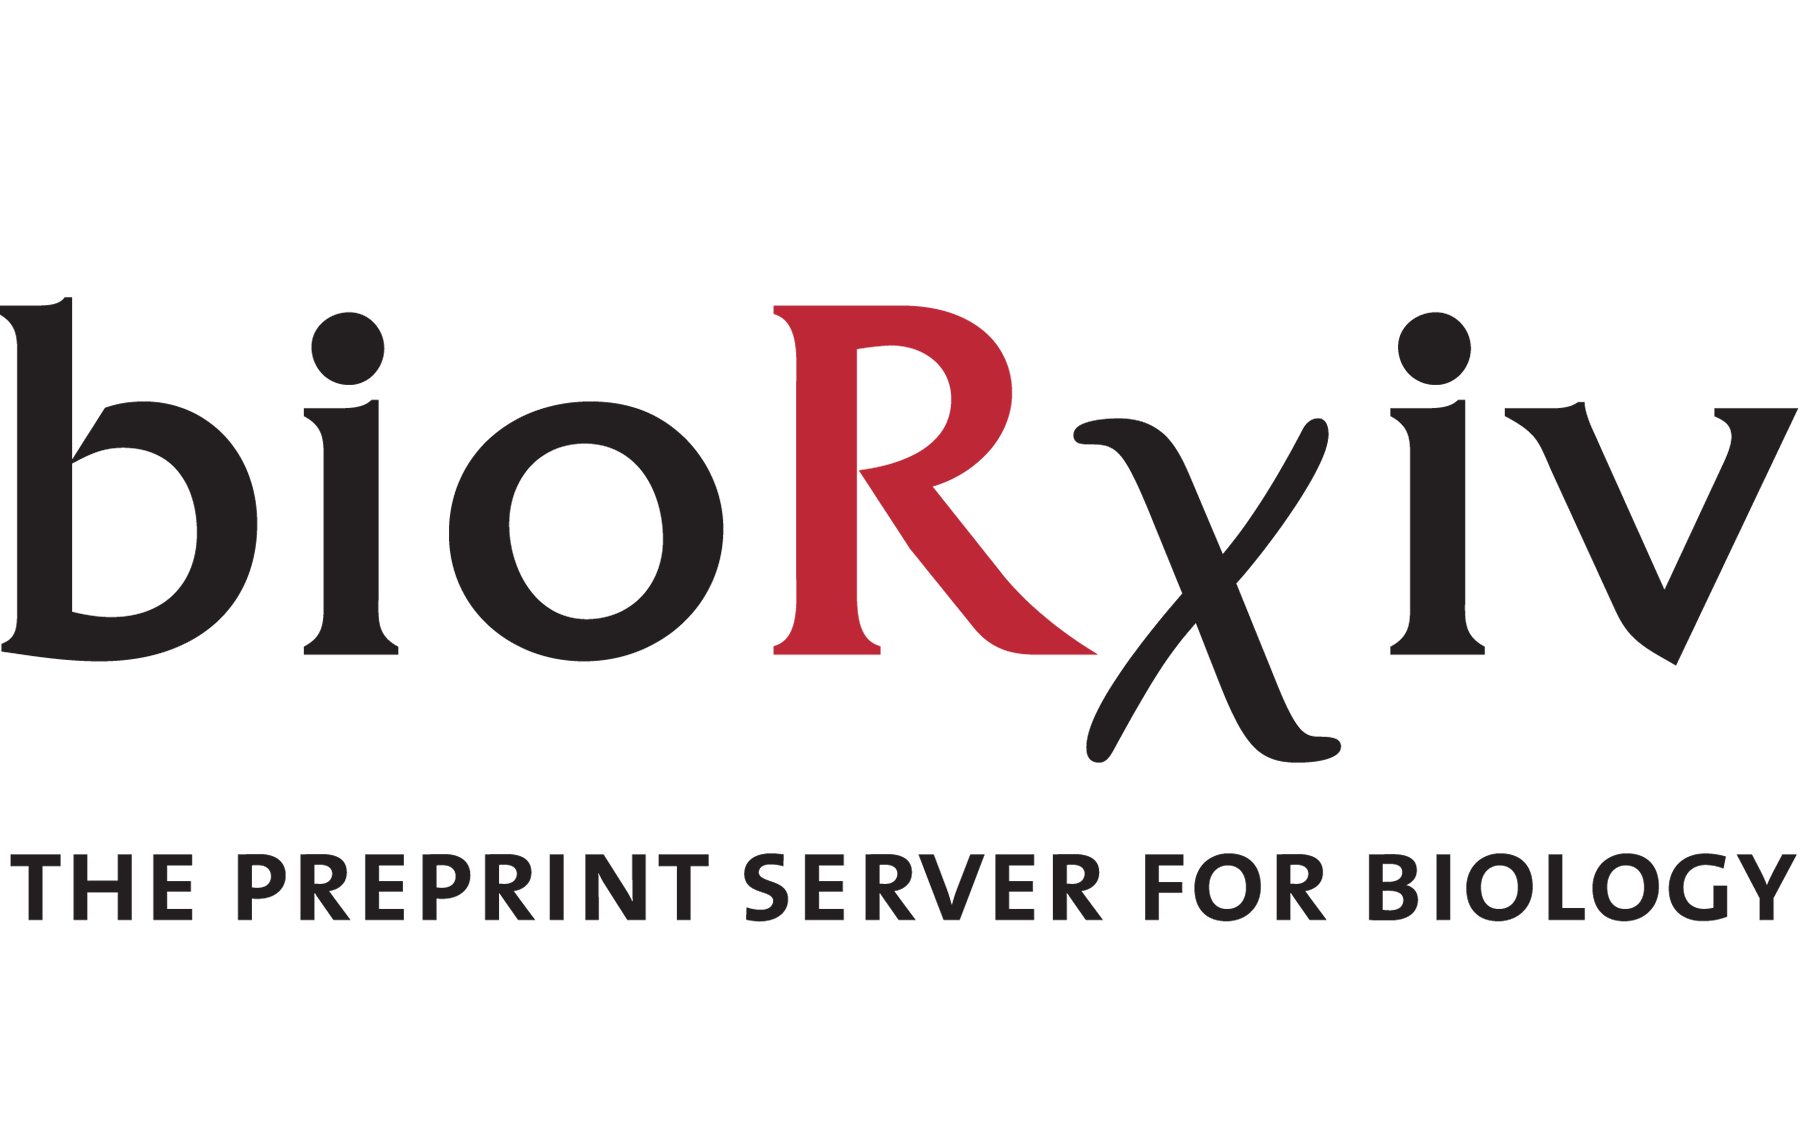 Our first research preprint is accessible on bioRxiv